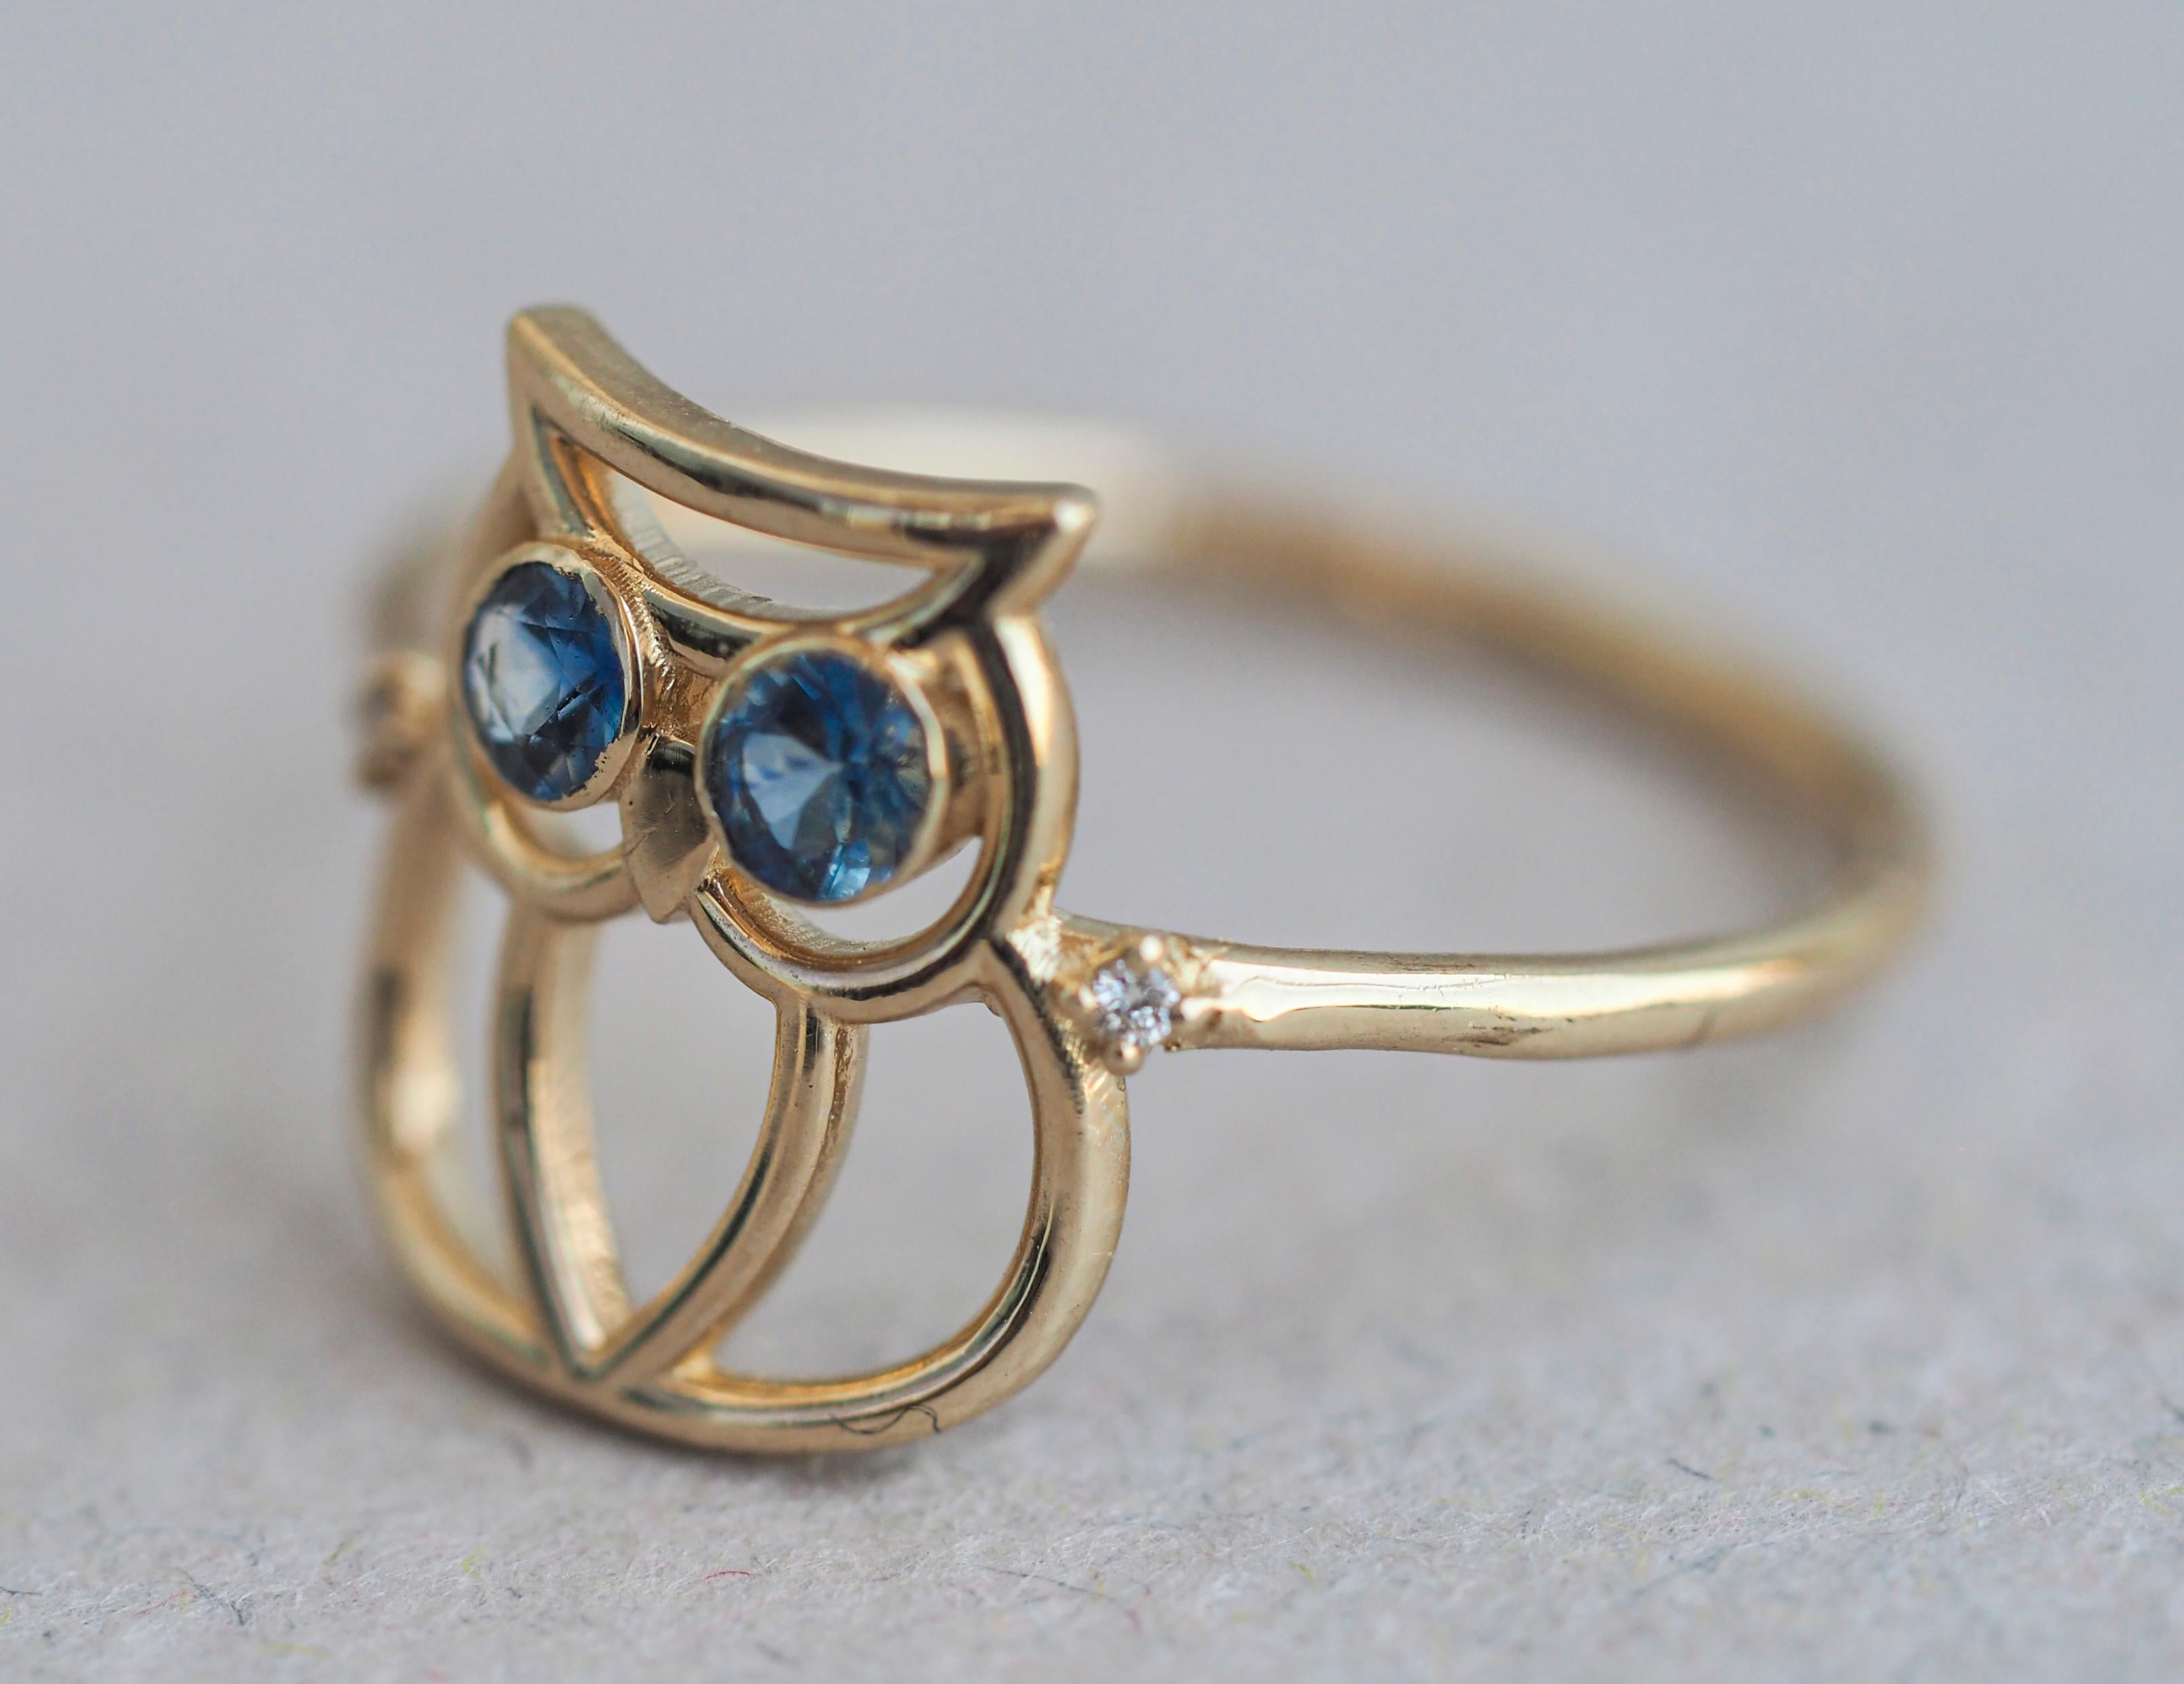 Women's 14k Gold Owl Ring with Tanzanite and Diamonds